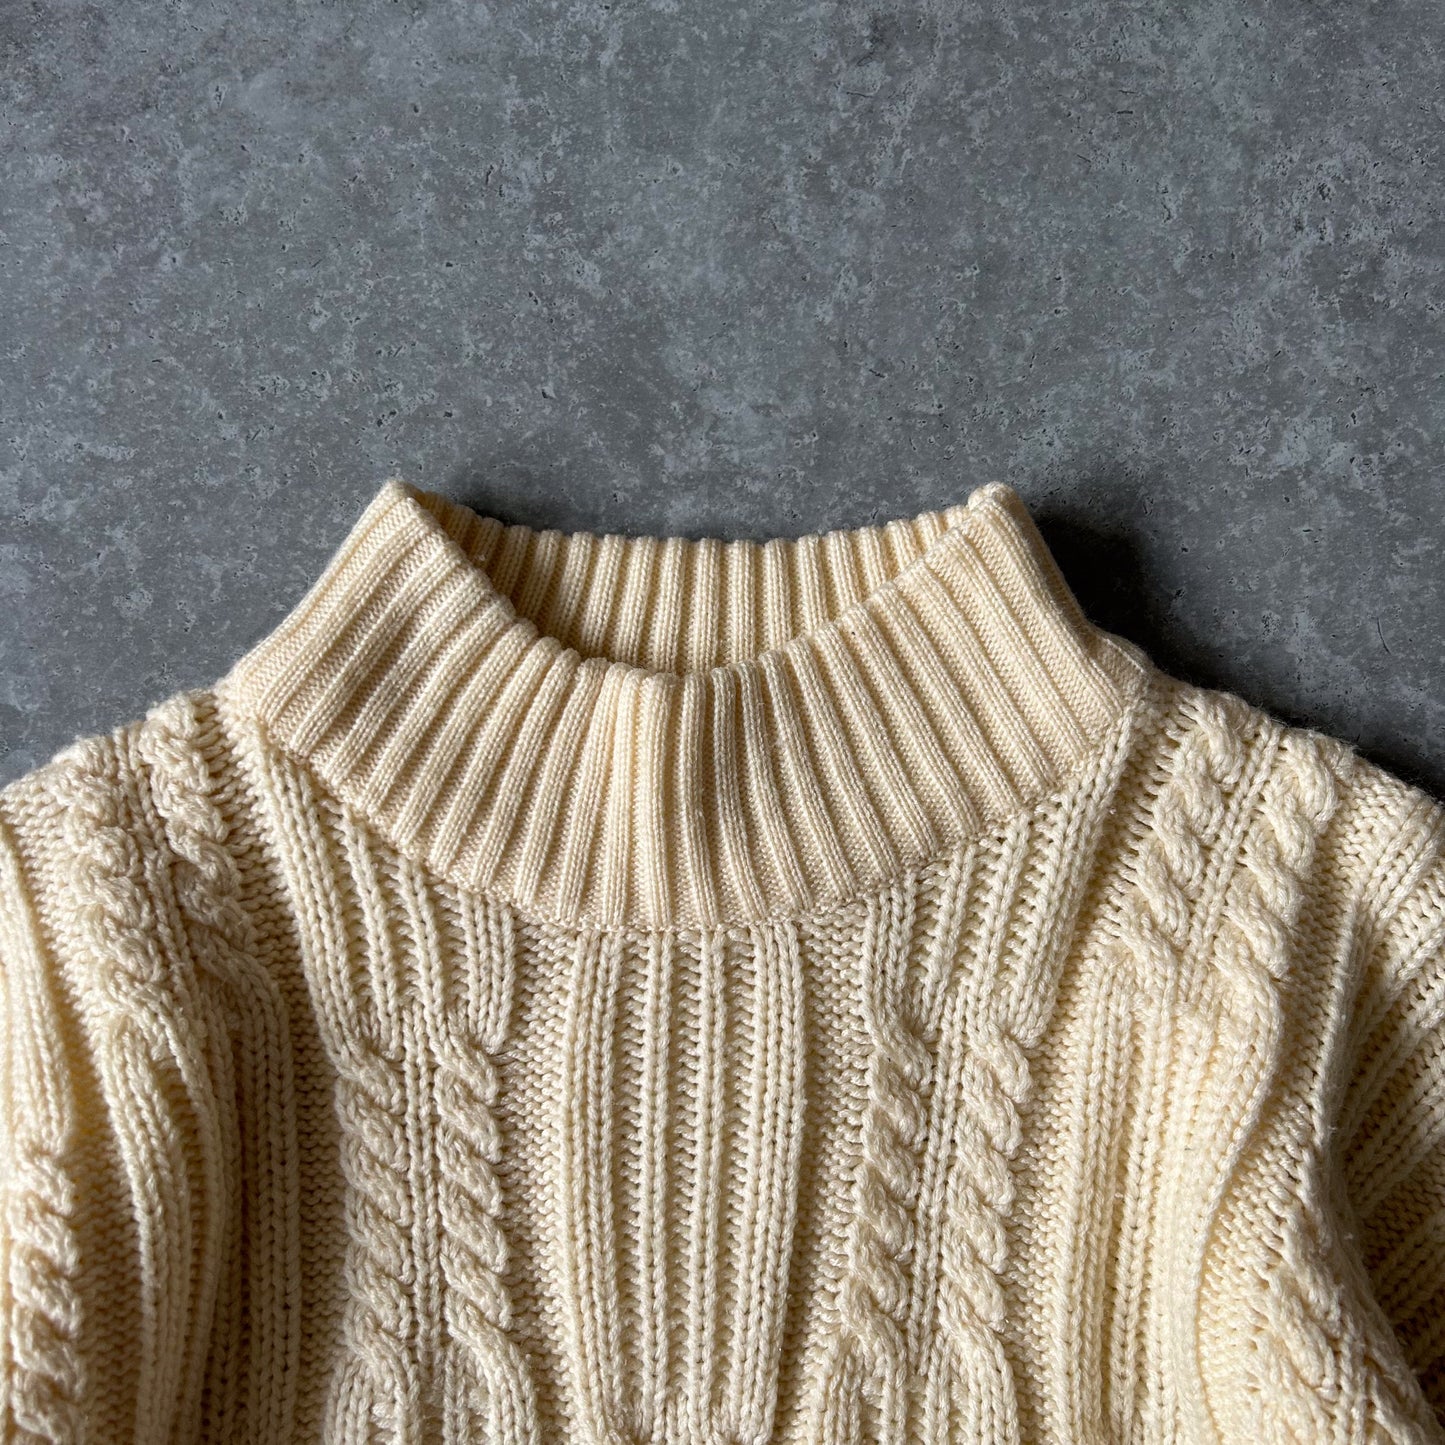 1990s - cable knitted pattern  mock neck jumper